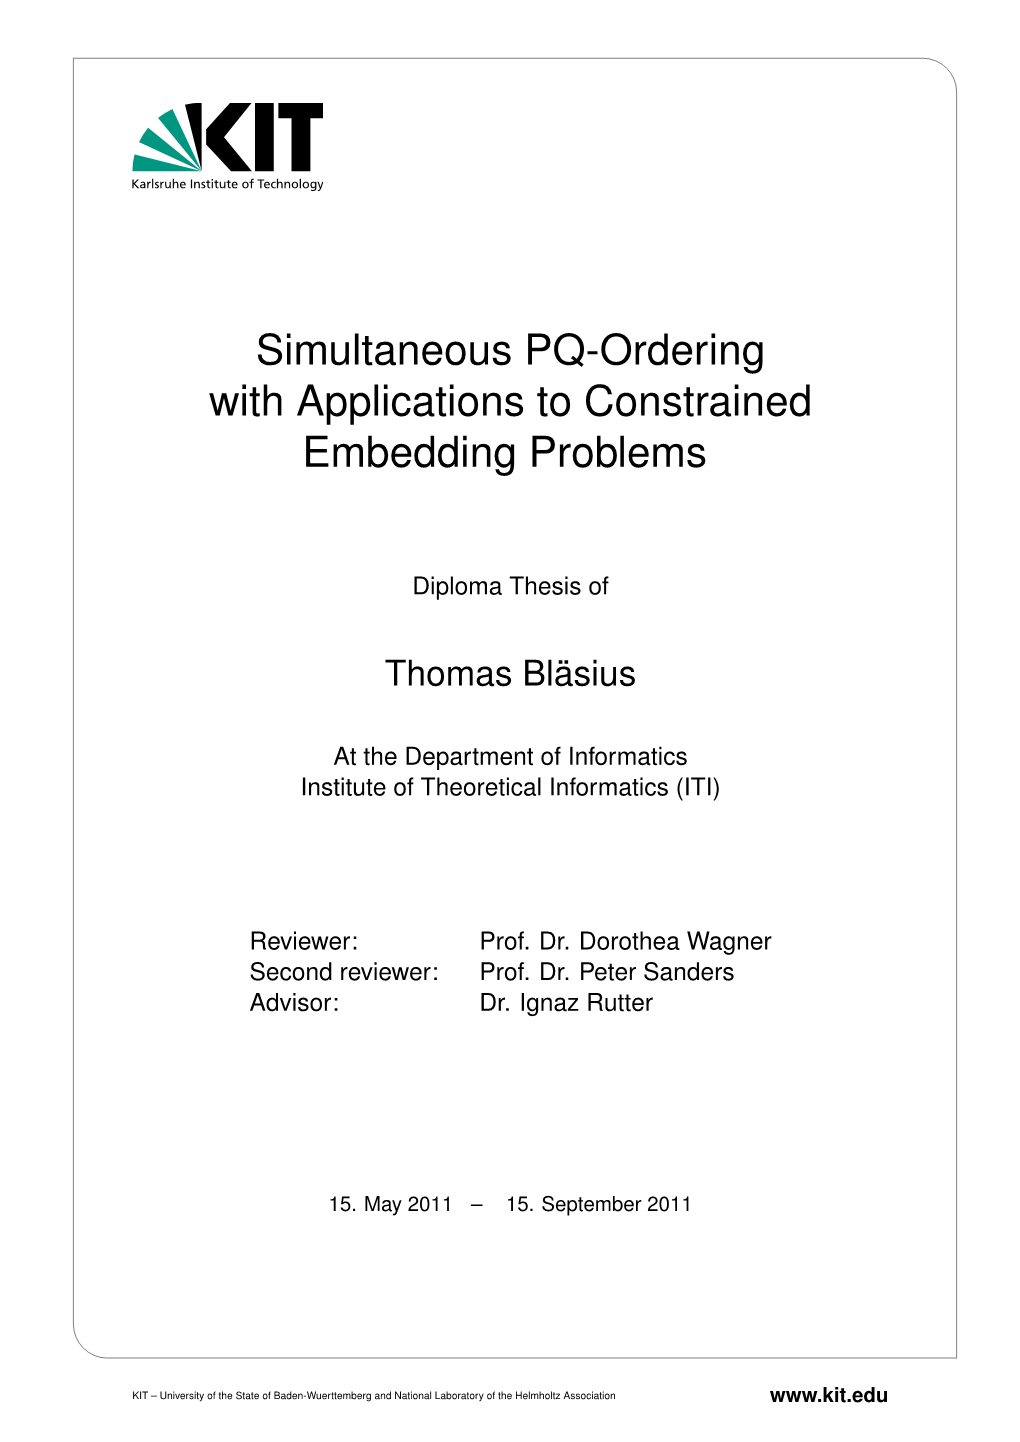 Simultaneous PQ-Ordering with Applications to Constrained Embedding Problems